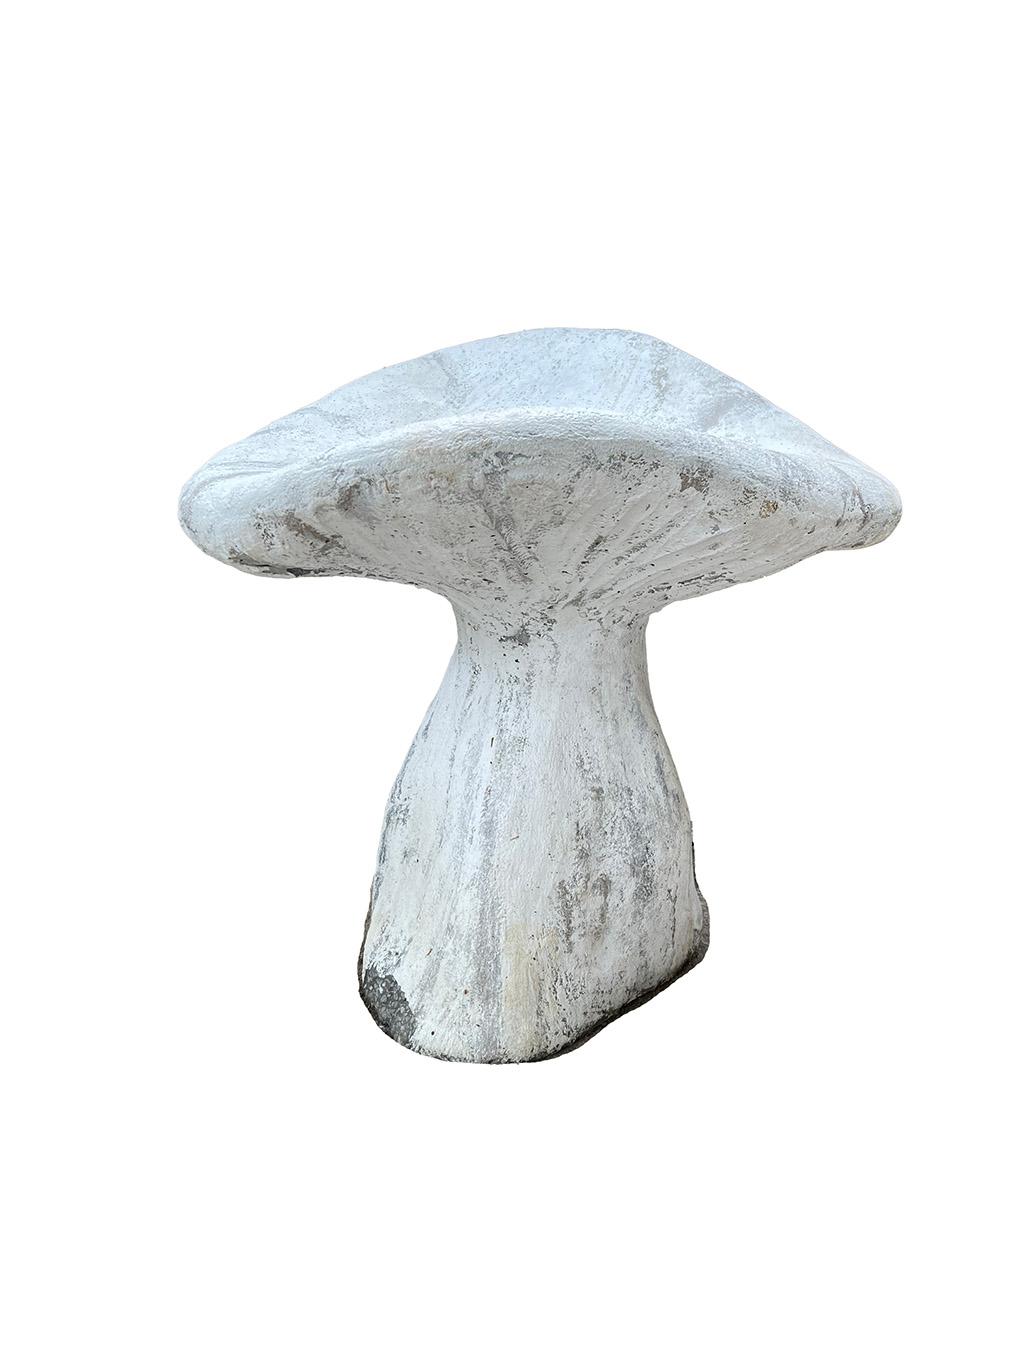 French Provincial Vintage Cement Mushroom Seats, a Pair